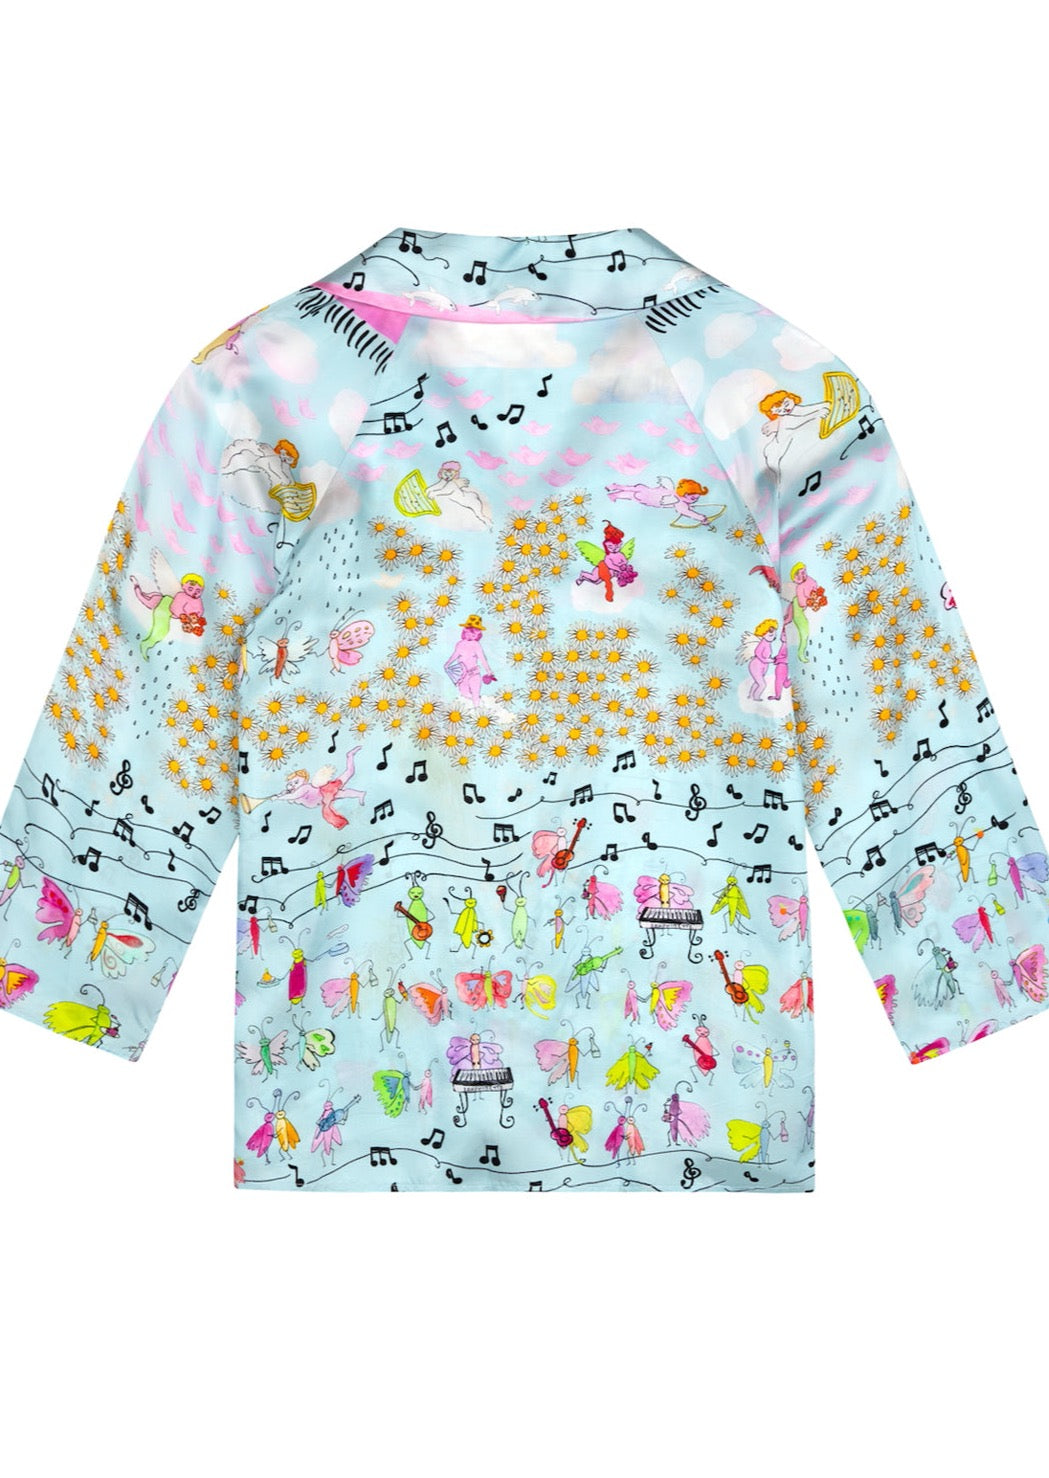 Relax into angelically soft viscose, printed in our SS22 Bad Girls Go to Heaven print. Dotted with cheerful daisies and music notes, our dancing bugs and high-flying cherubs